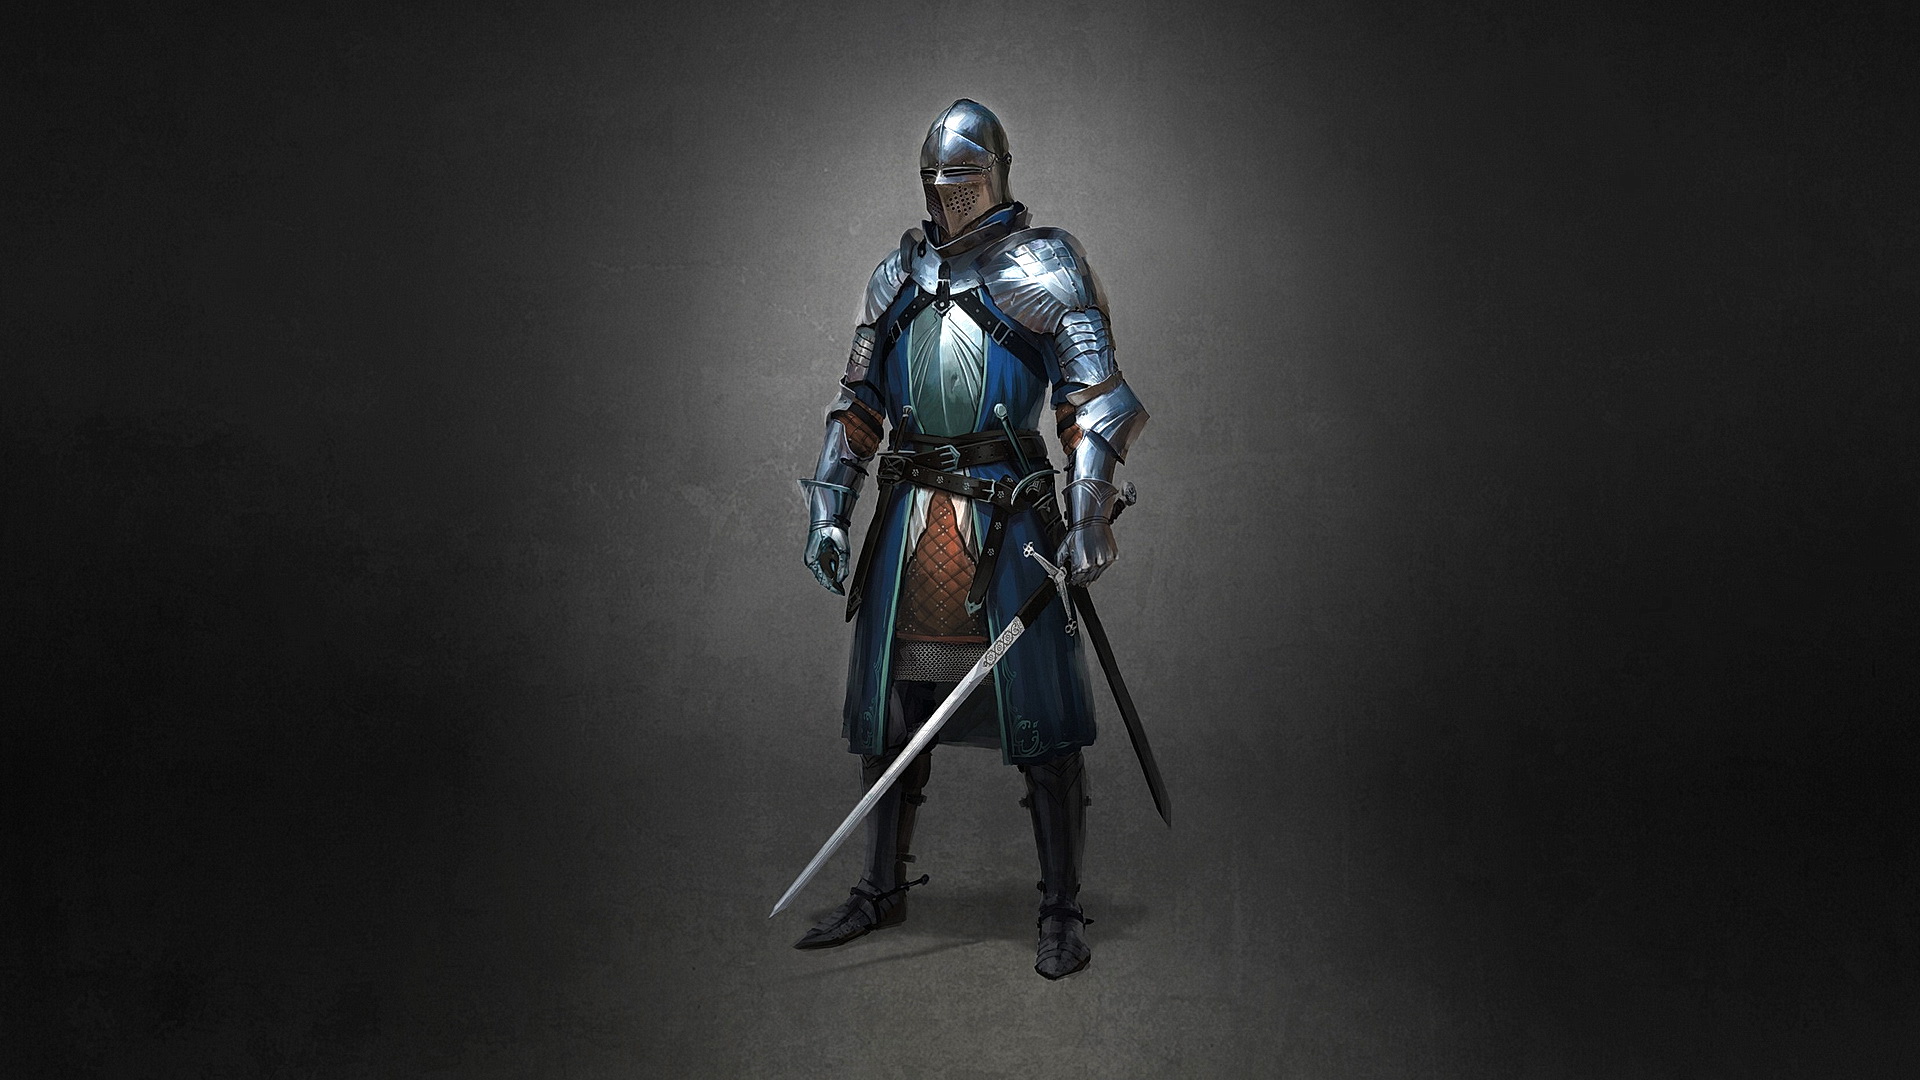 Knight with swords